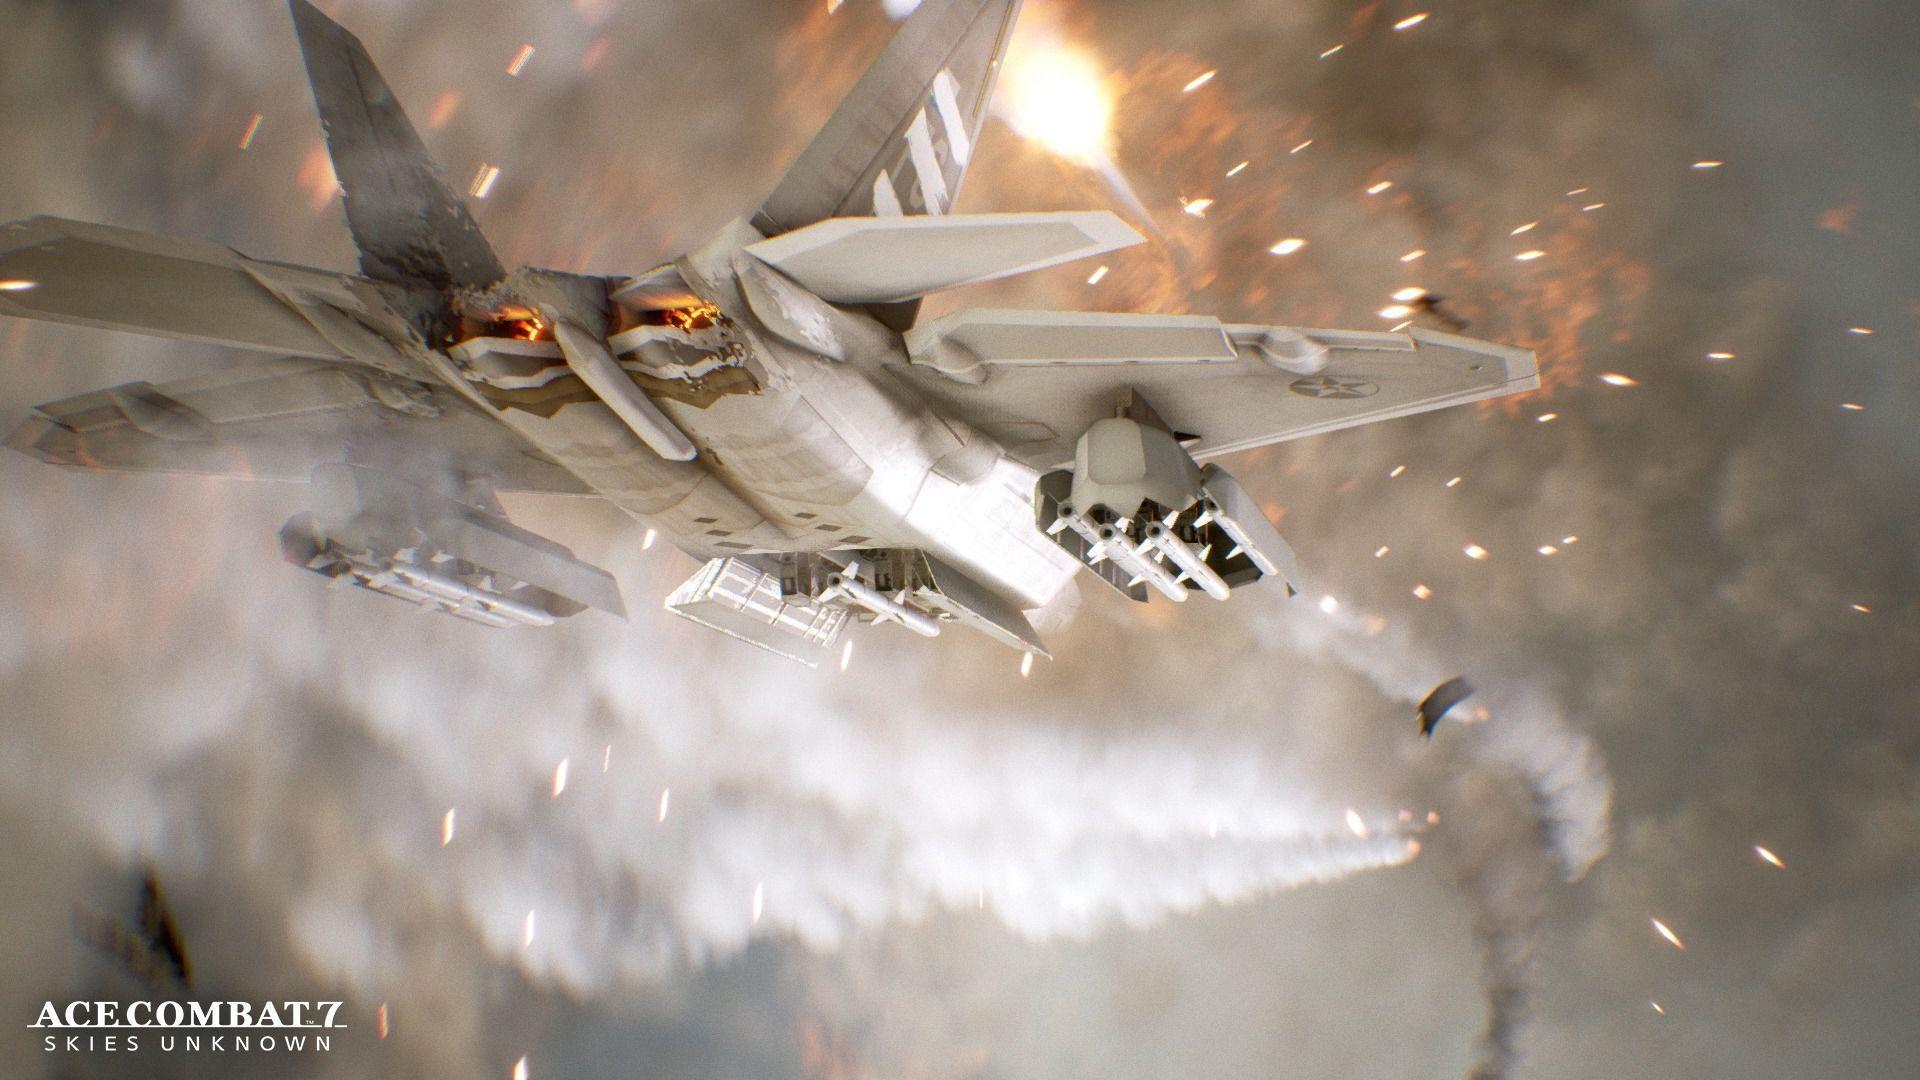 Ace Combat 7 Skies Unknown Wallpaper Background